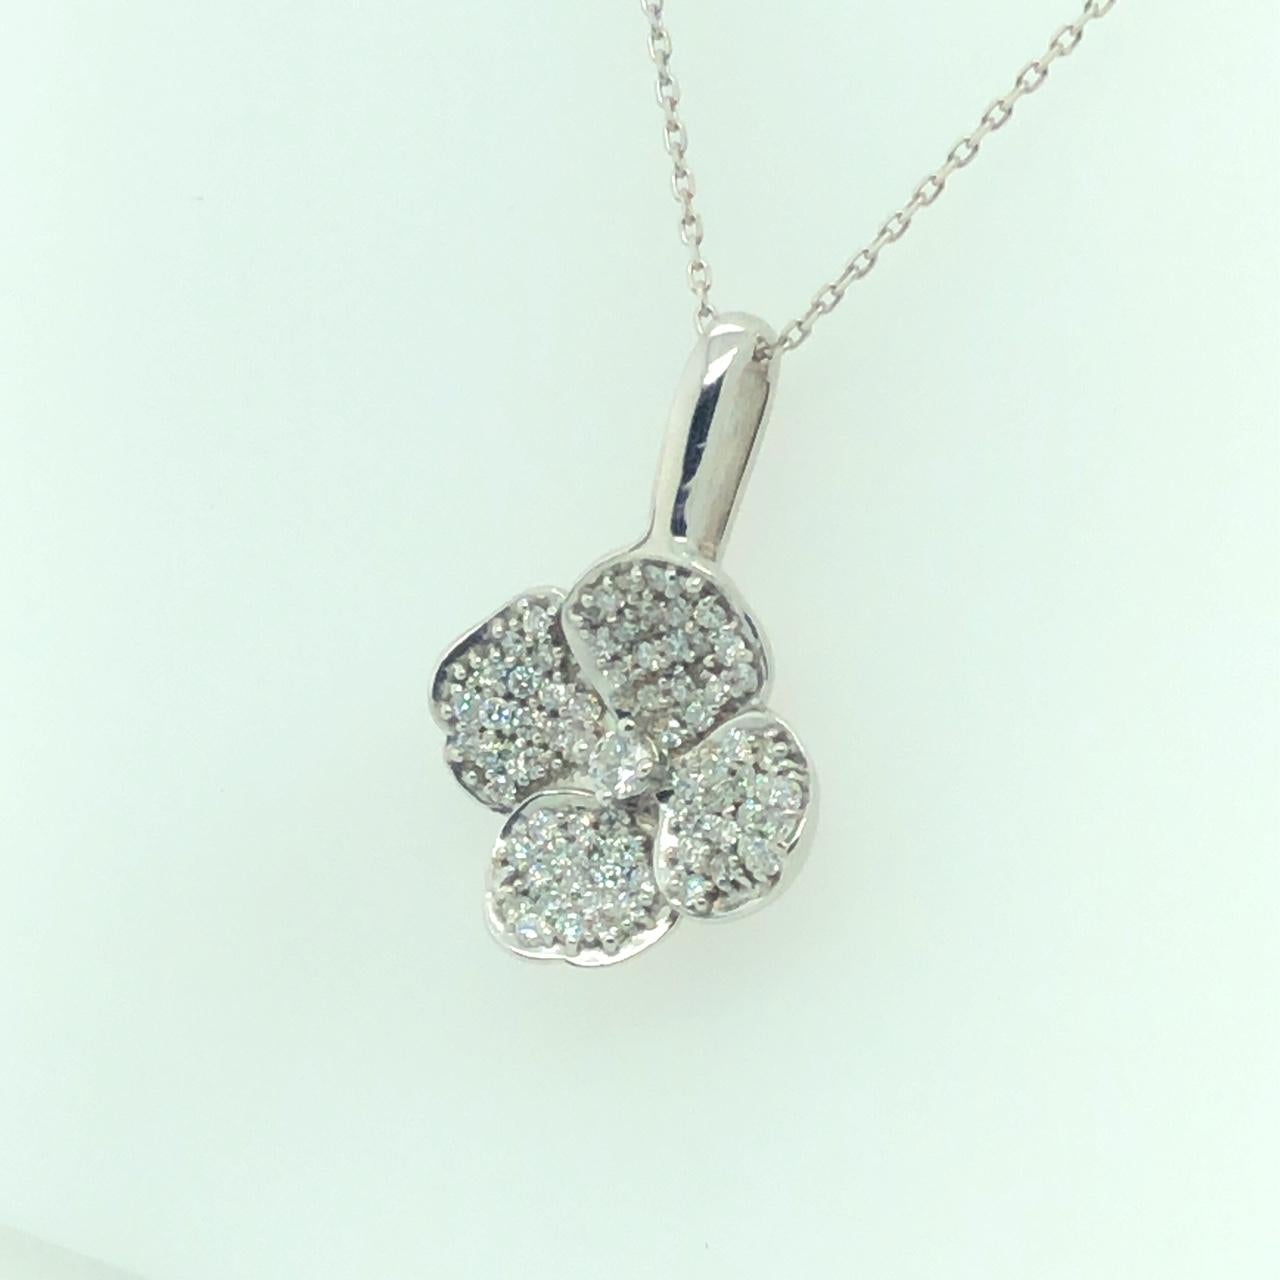 DIAMOND FLORAL PENDANT 18K WHITE GOLD

Total Carat Weight of Center Diamonds 0.08 carat

Micropave Round Brilliant Diamonds 0.77 carat

F/G Color VS Clarity

0.85 CTW of all Diamonds

With 16